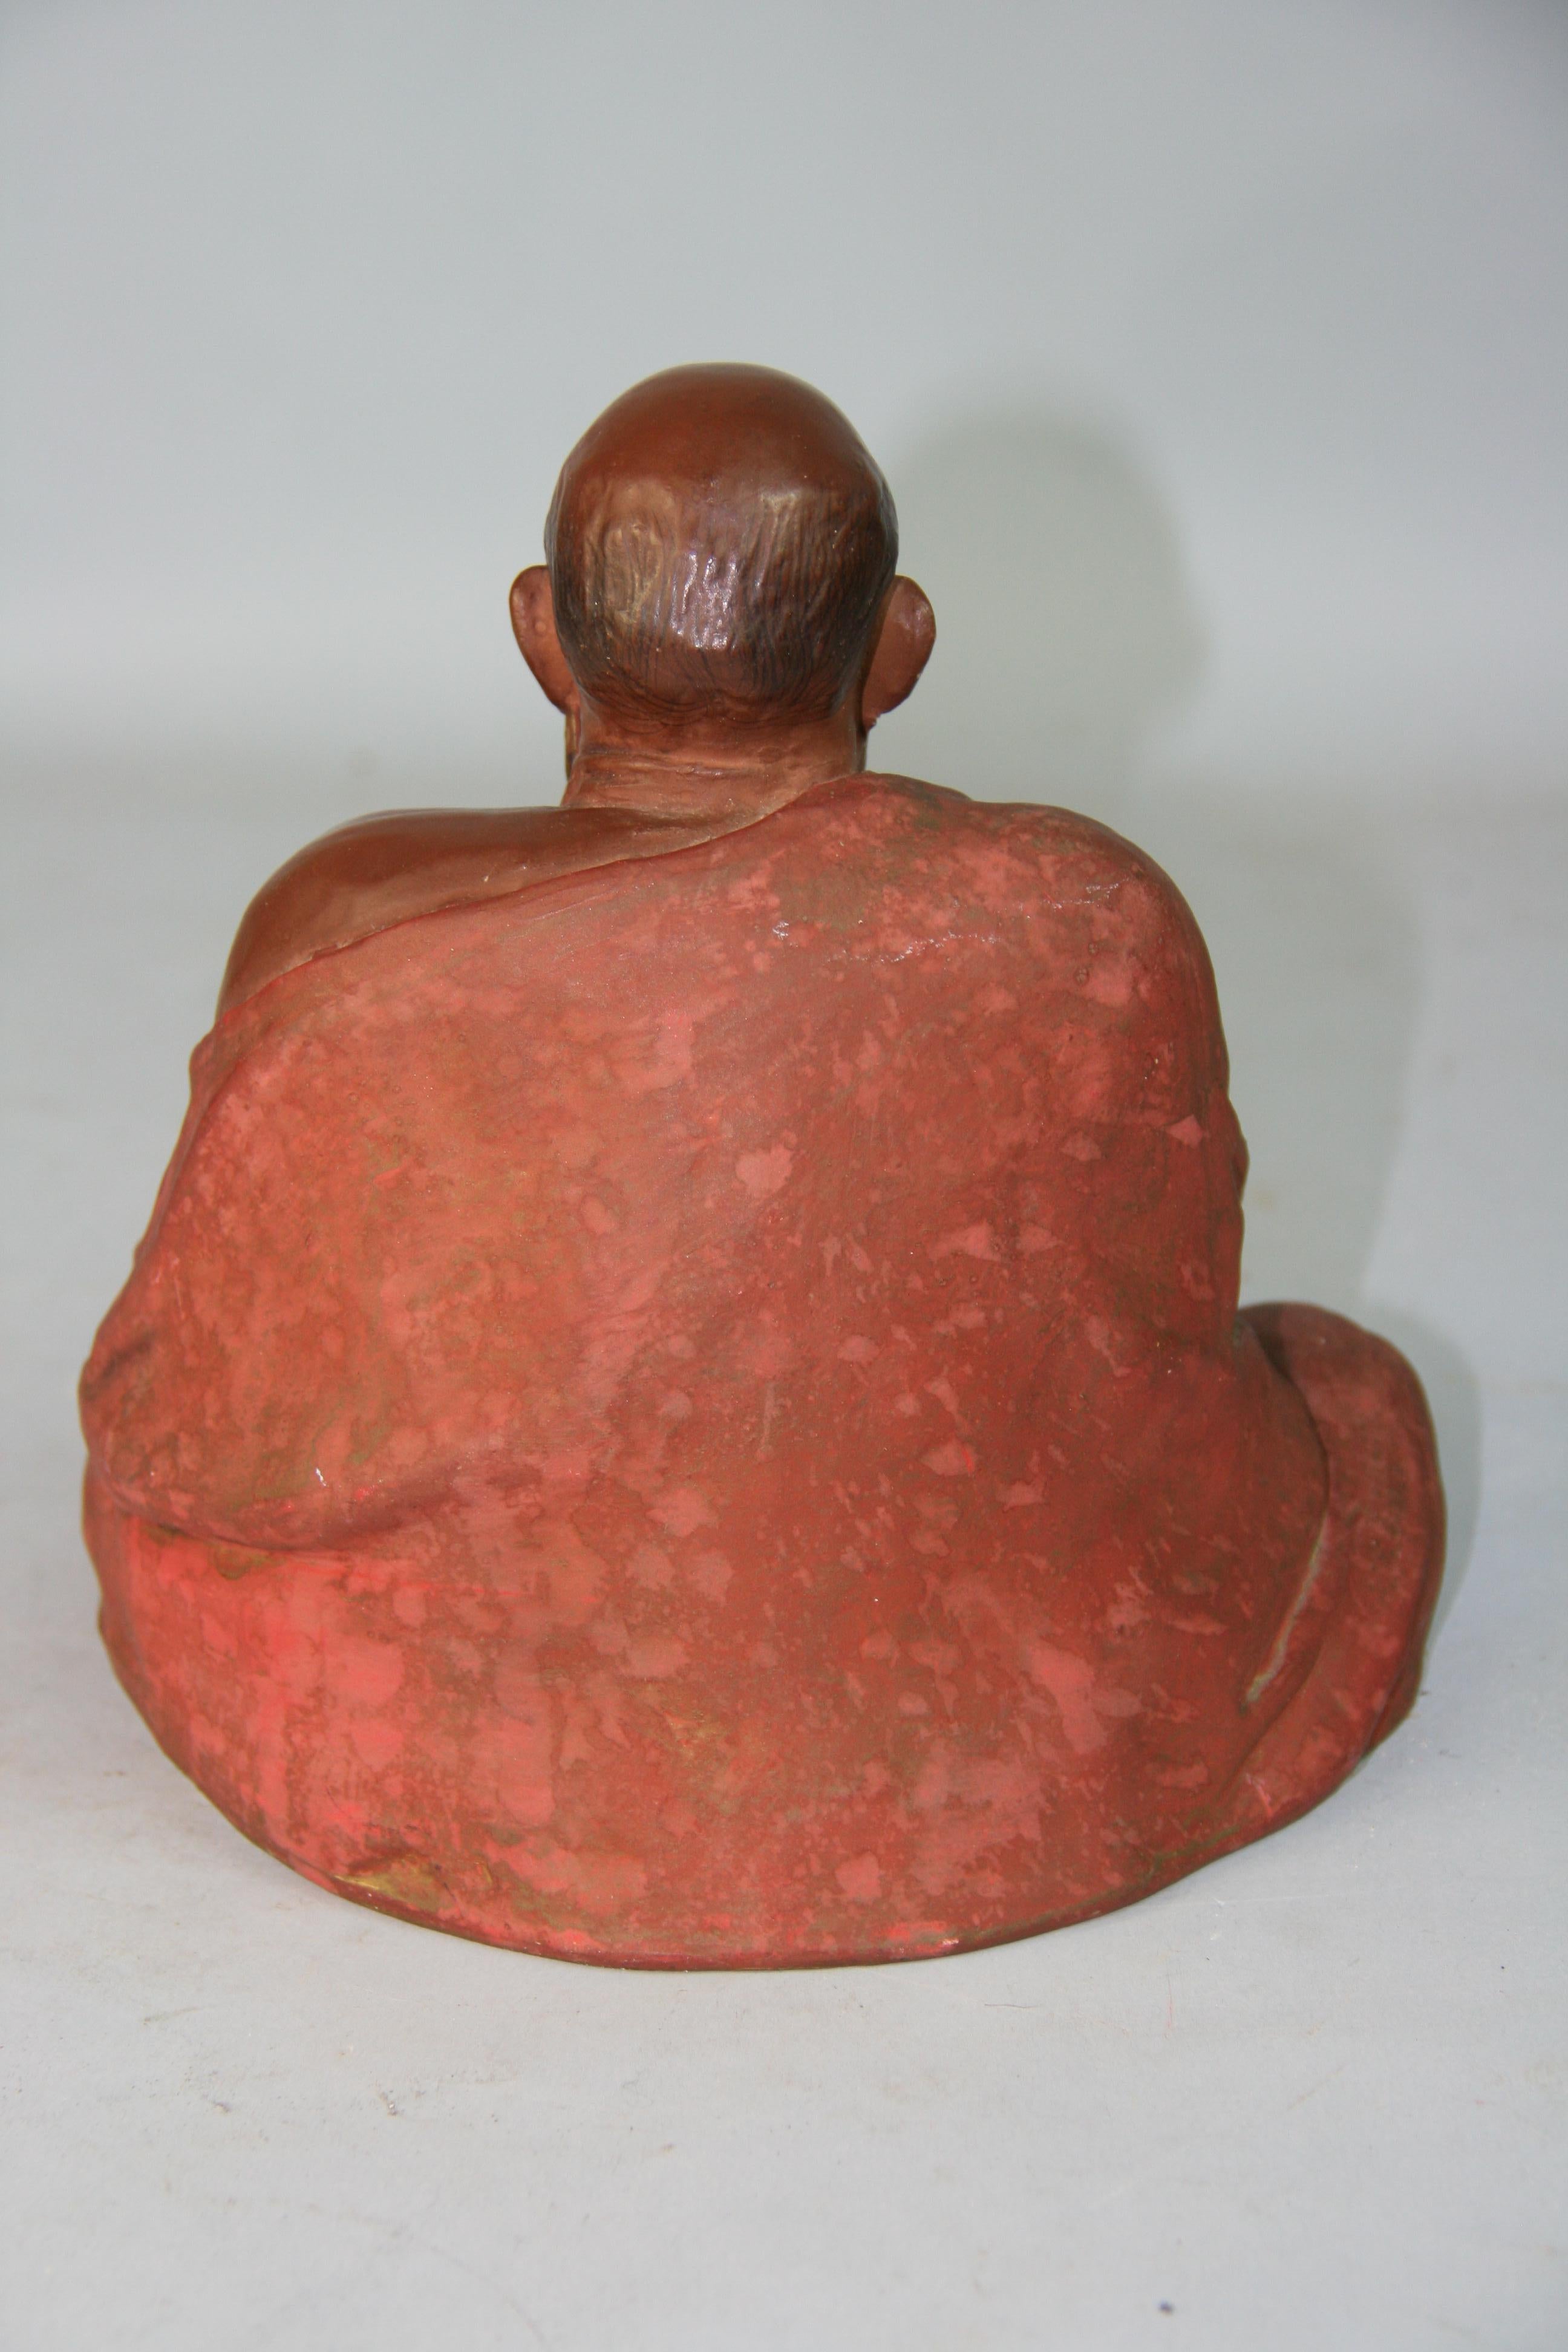 Antique Japanese Seated Ceramic Buddhist  Monk  Sculpture For Sale 3